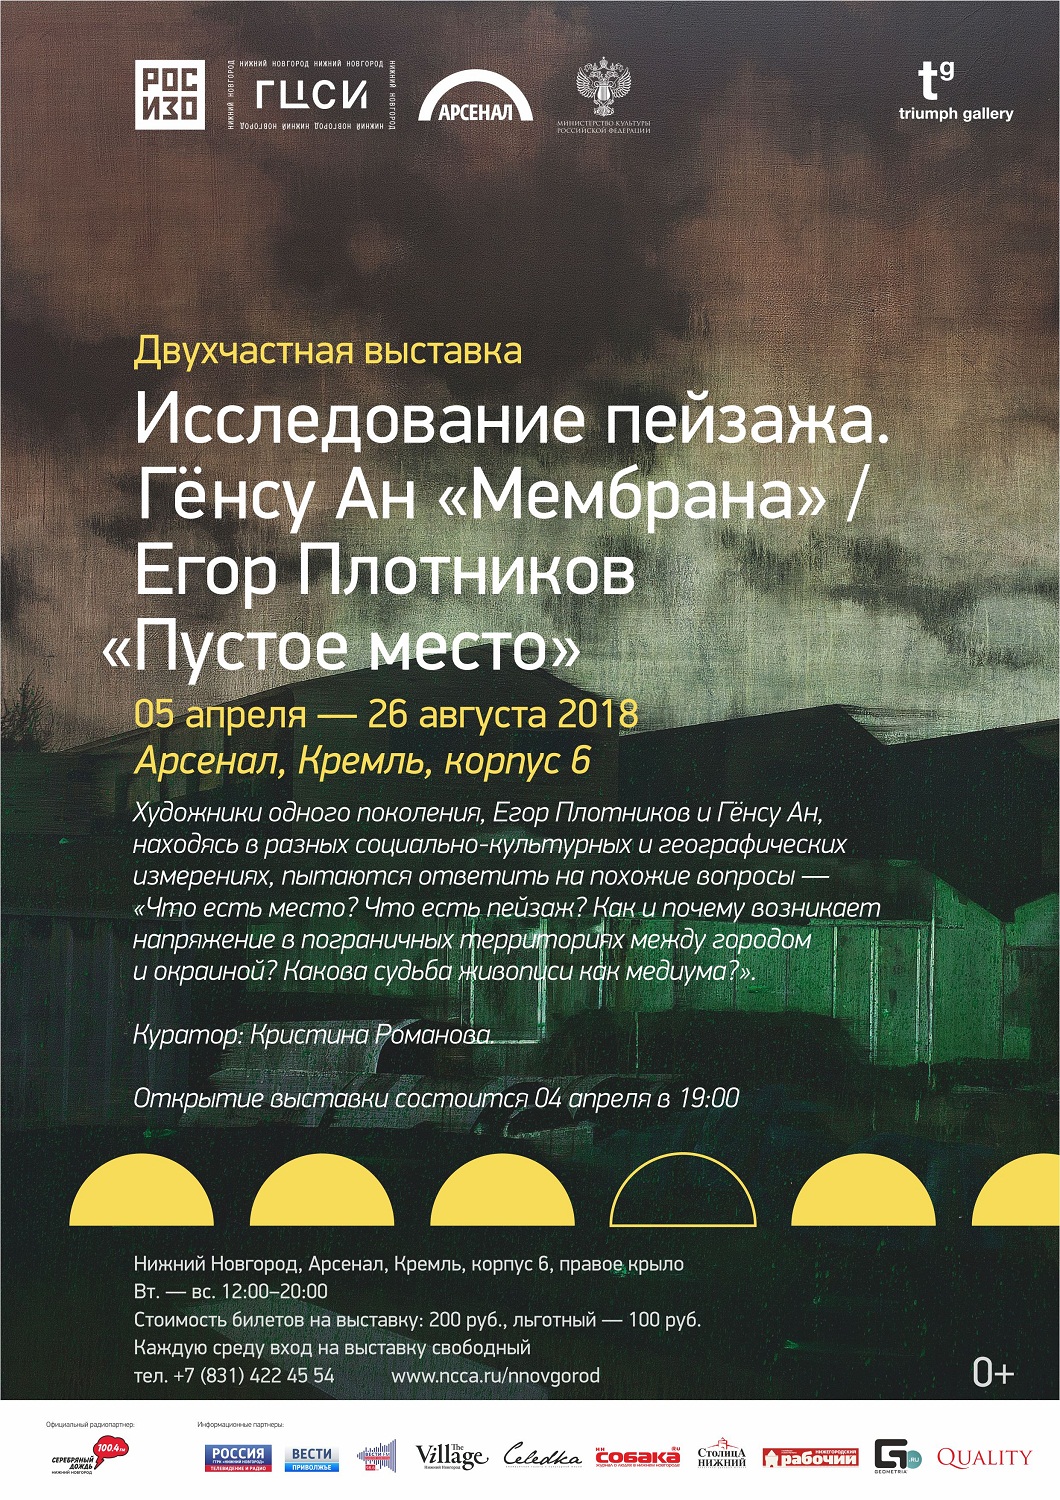 Two-part exhibition “Study of the landscape”